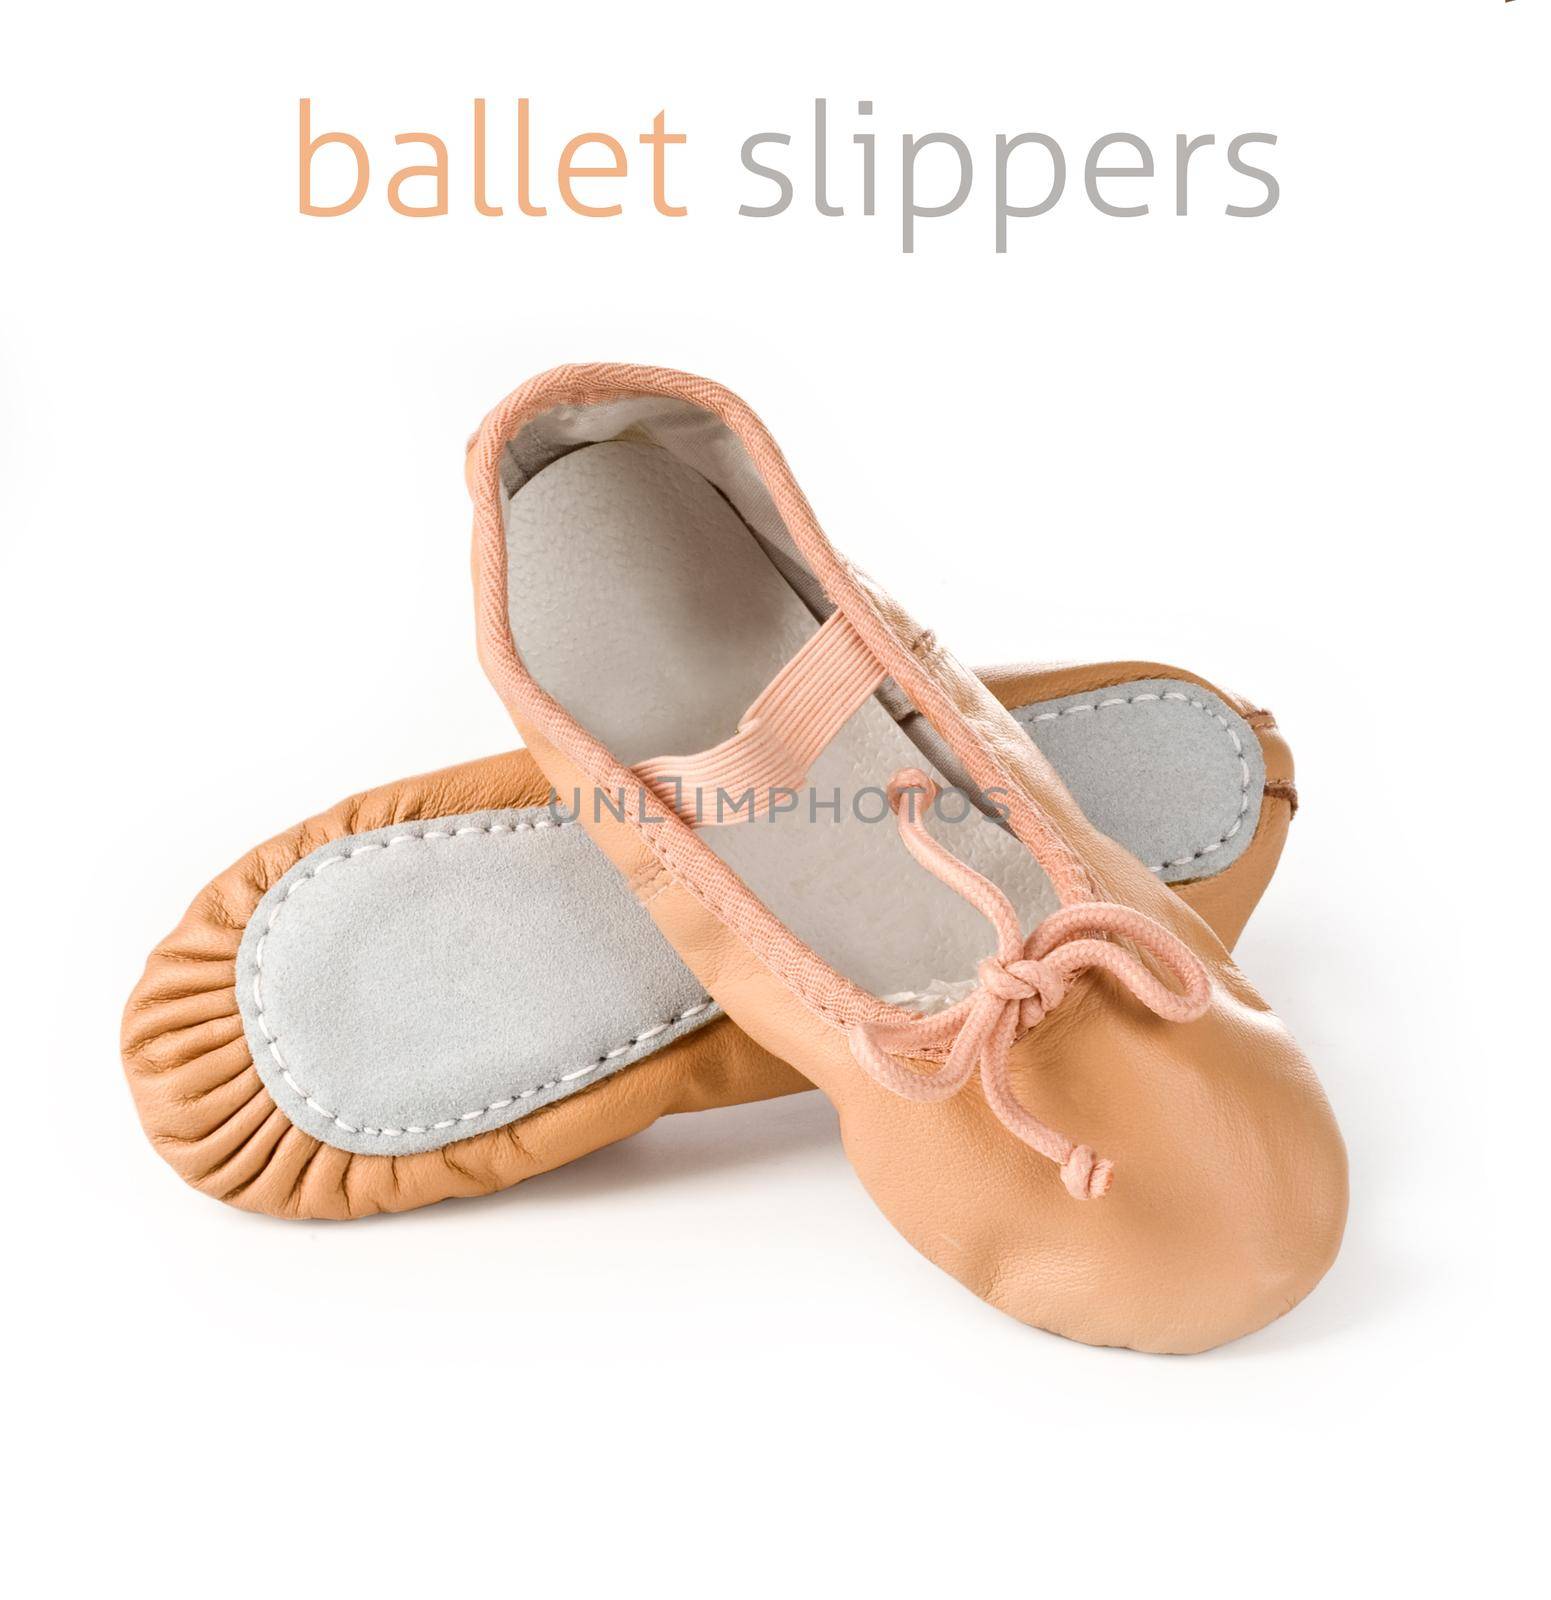 Small pink ballet slippers on a white background